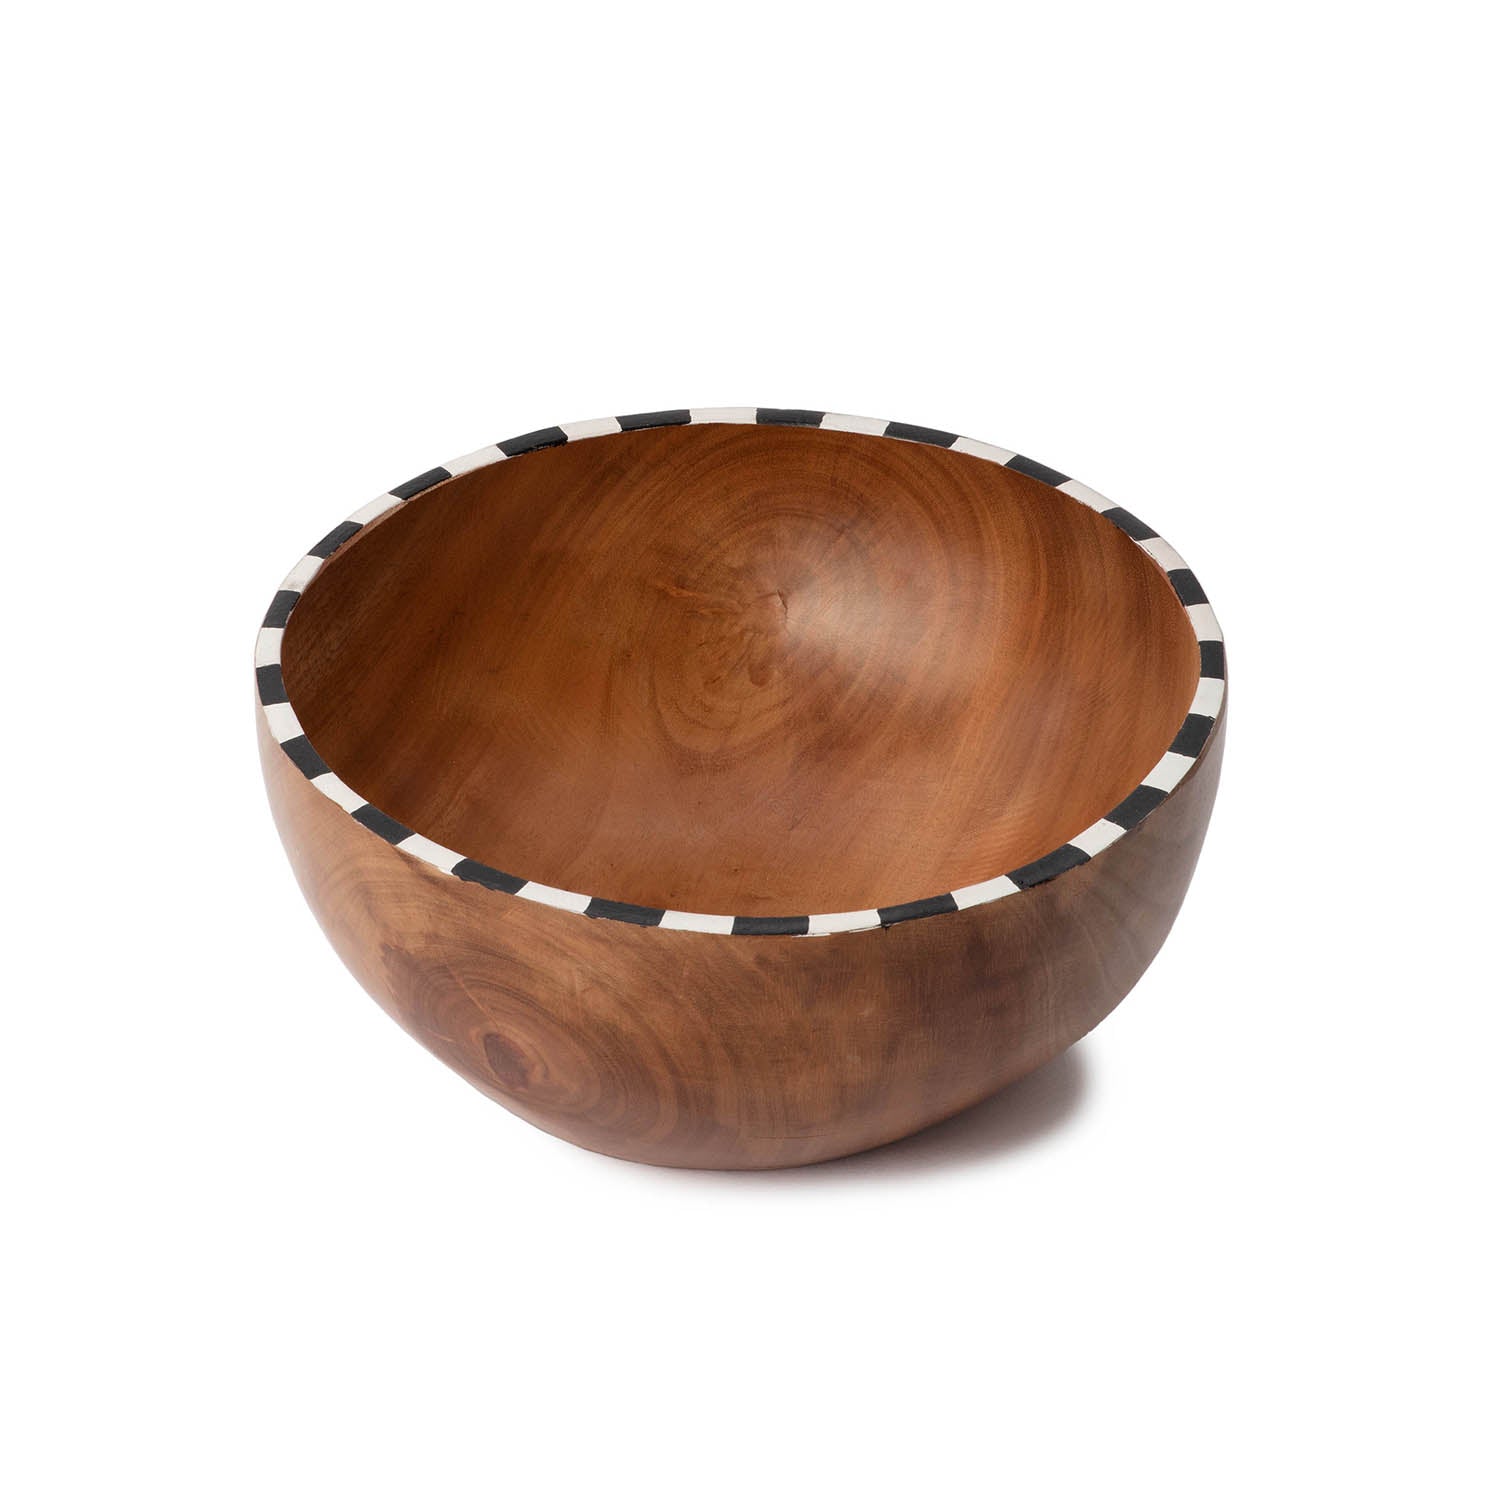 wooden serving bowl with black and white trim